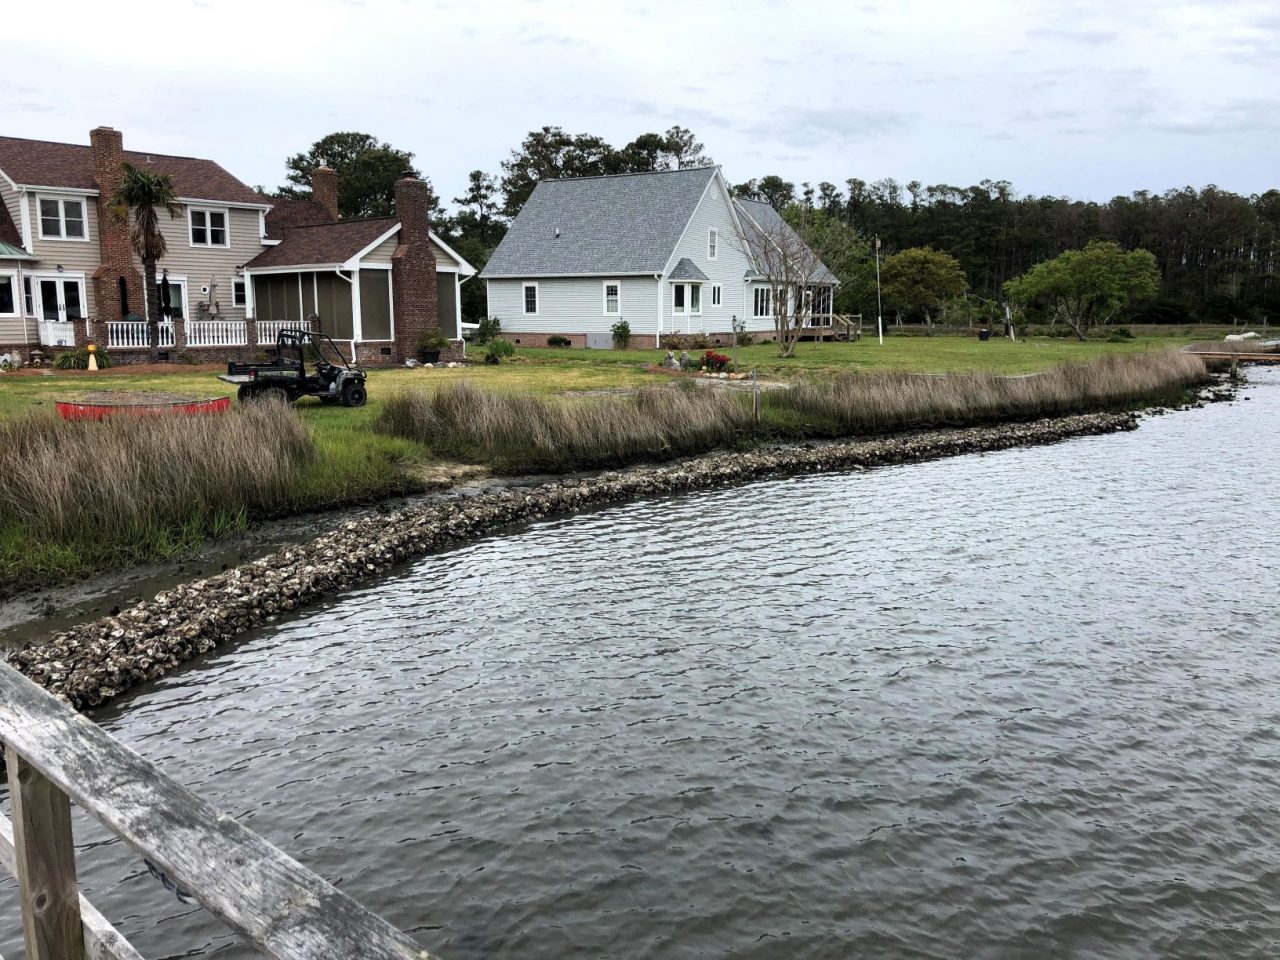 Real Estate Agents Can Learn Benefits Of Living Shorelines Coastal Review